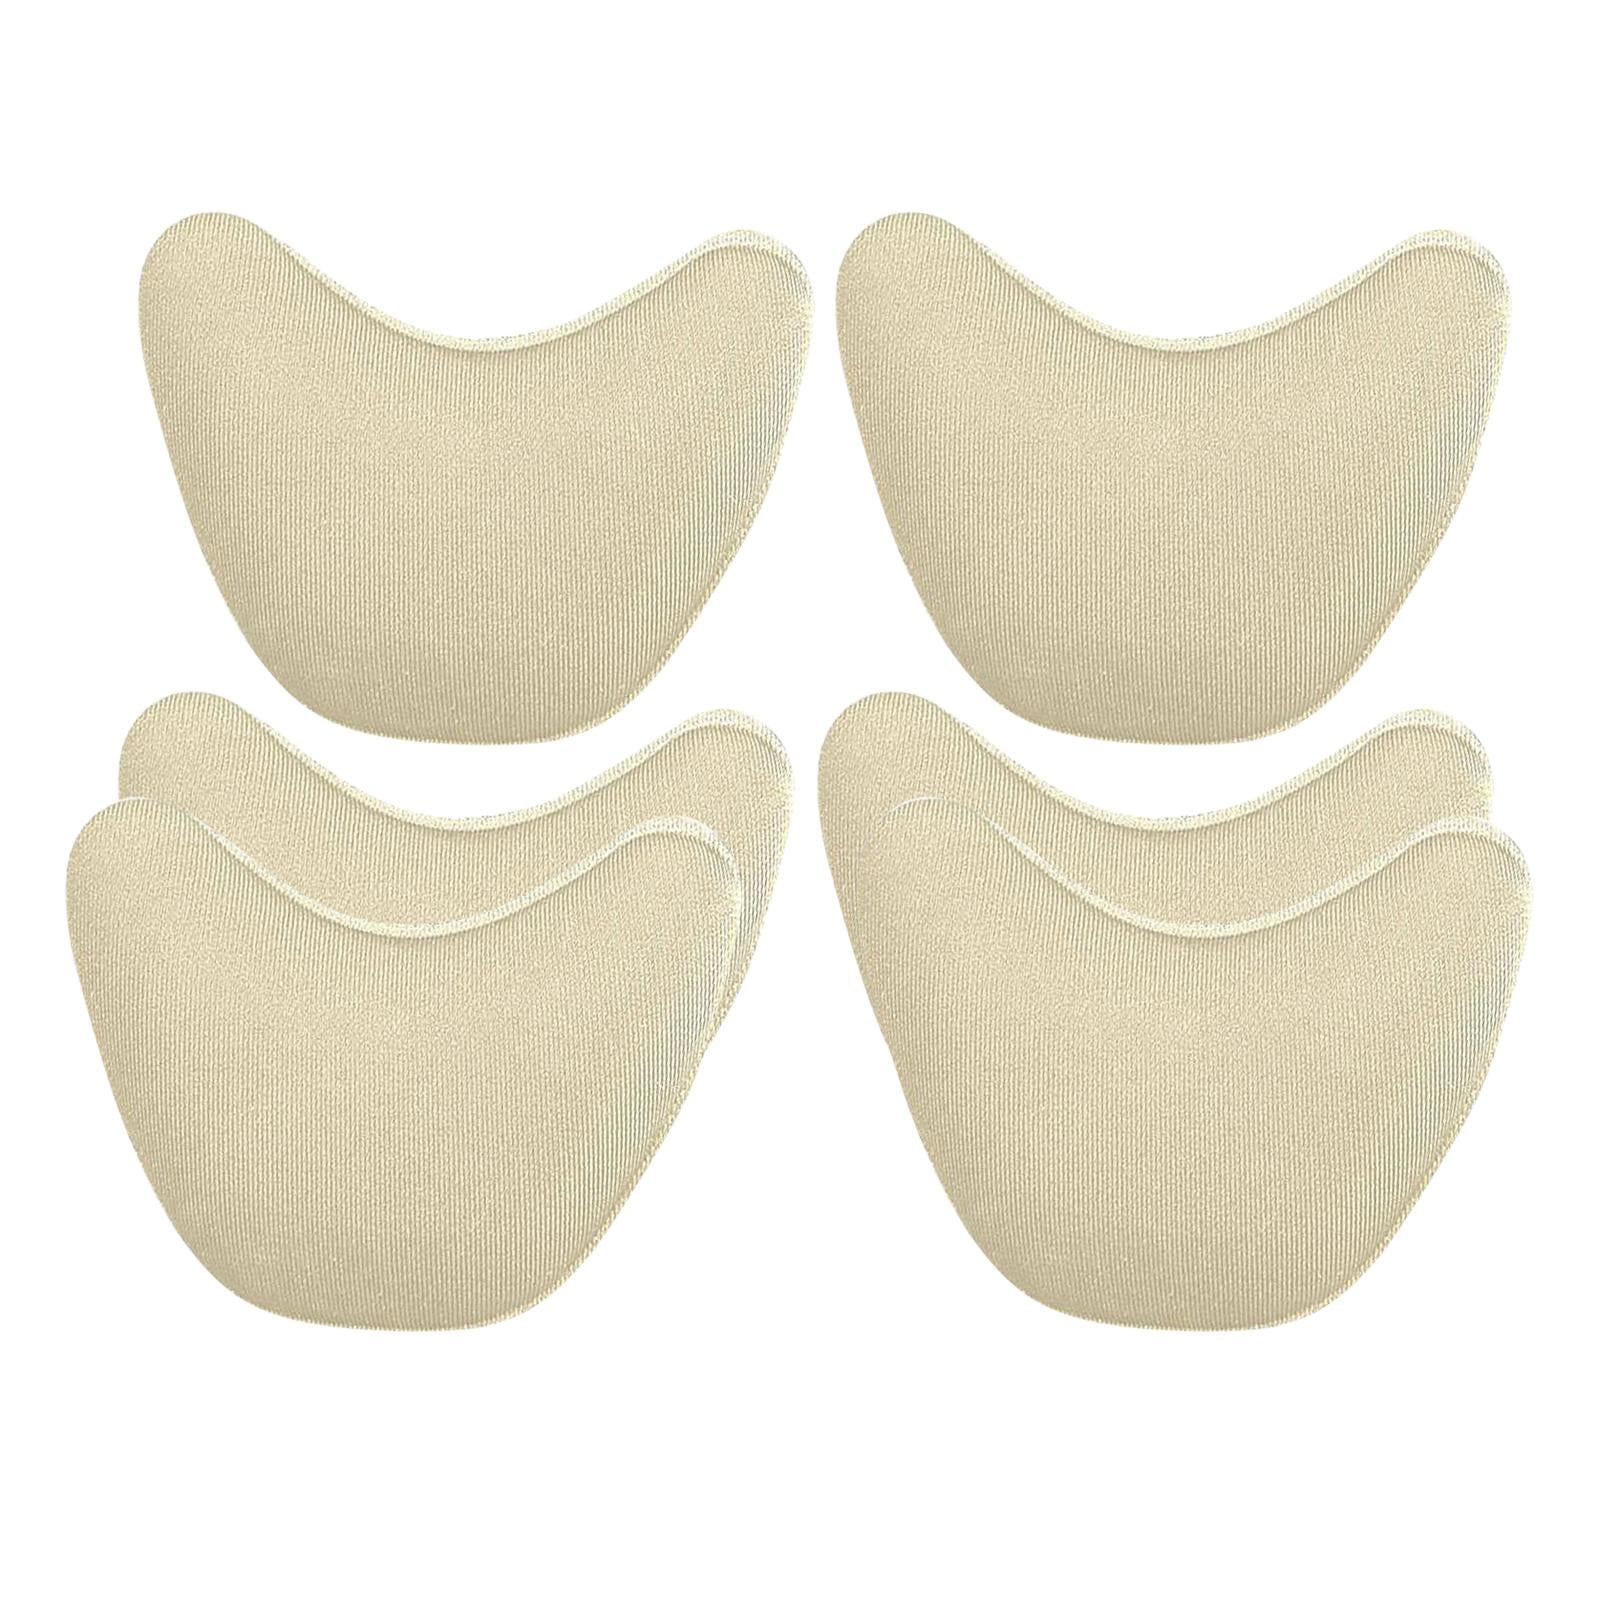 Details about   3 Pairs Shoe Toe Filler Insole Women Shoe Inserts Support 